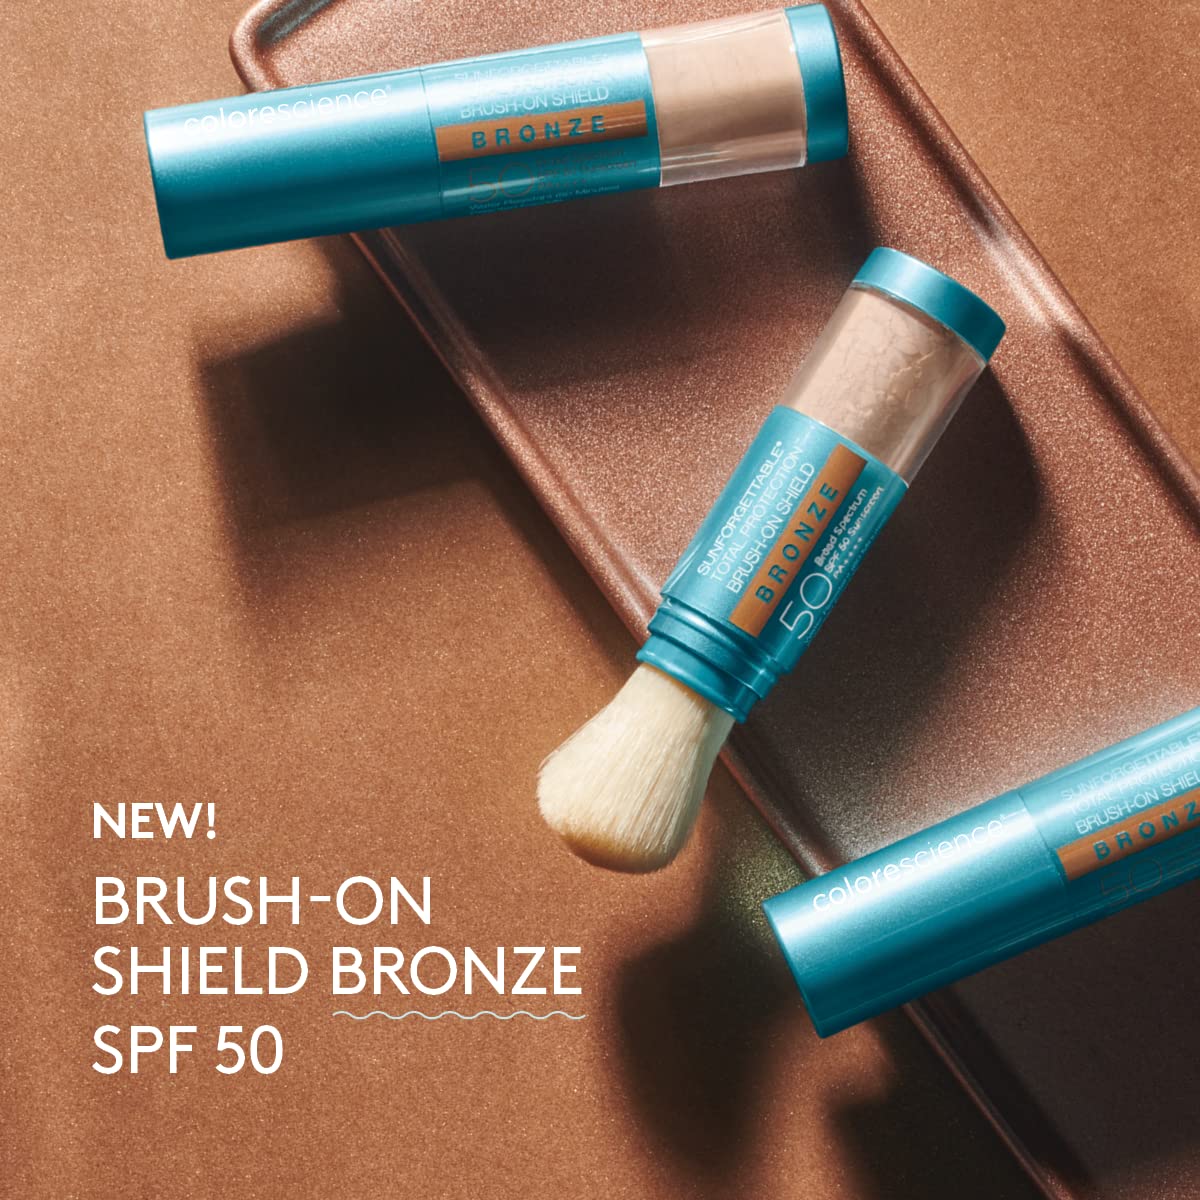 Colorescience Sunforgettable Total Protection Brush On Shield BRONZE SPF 50 : Beauty & Personal Care